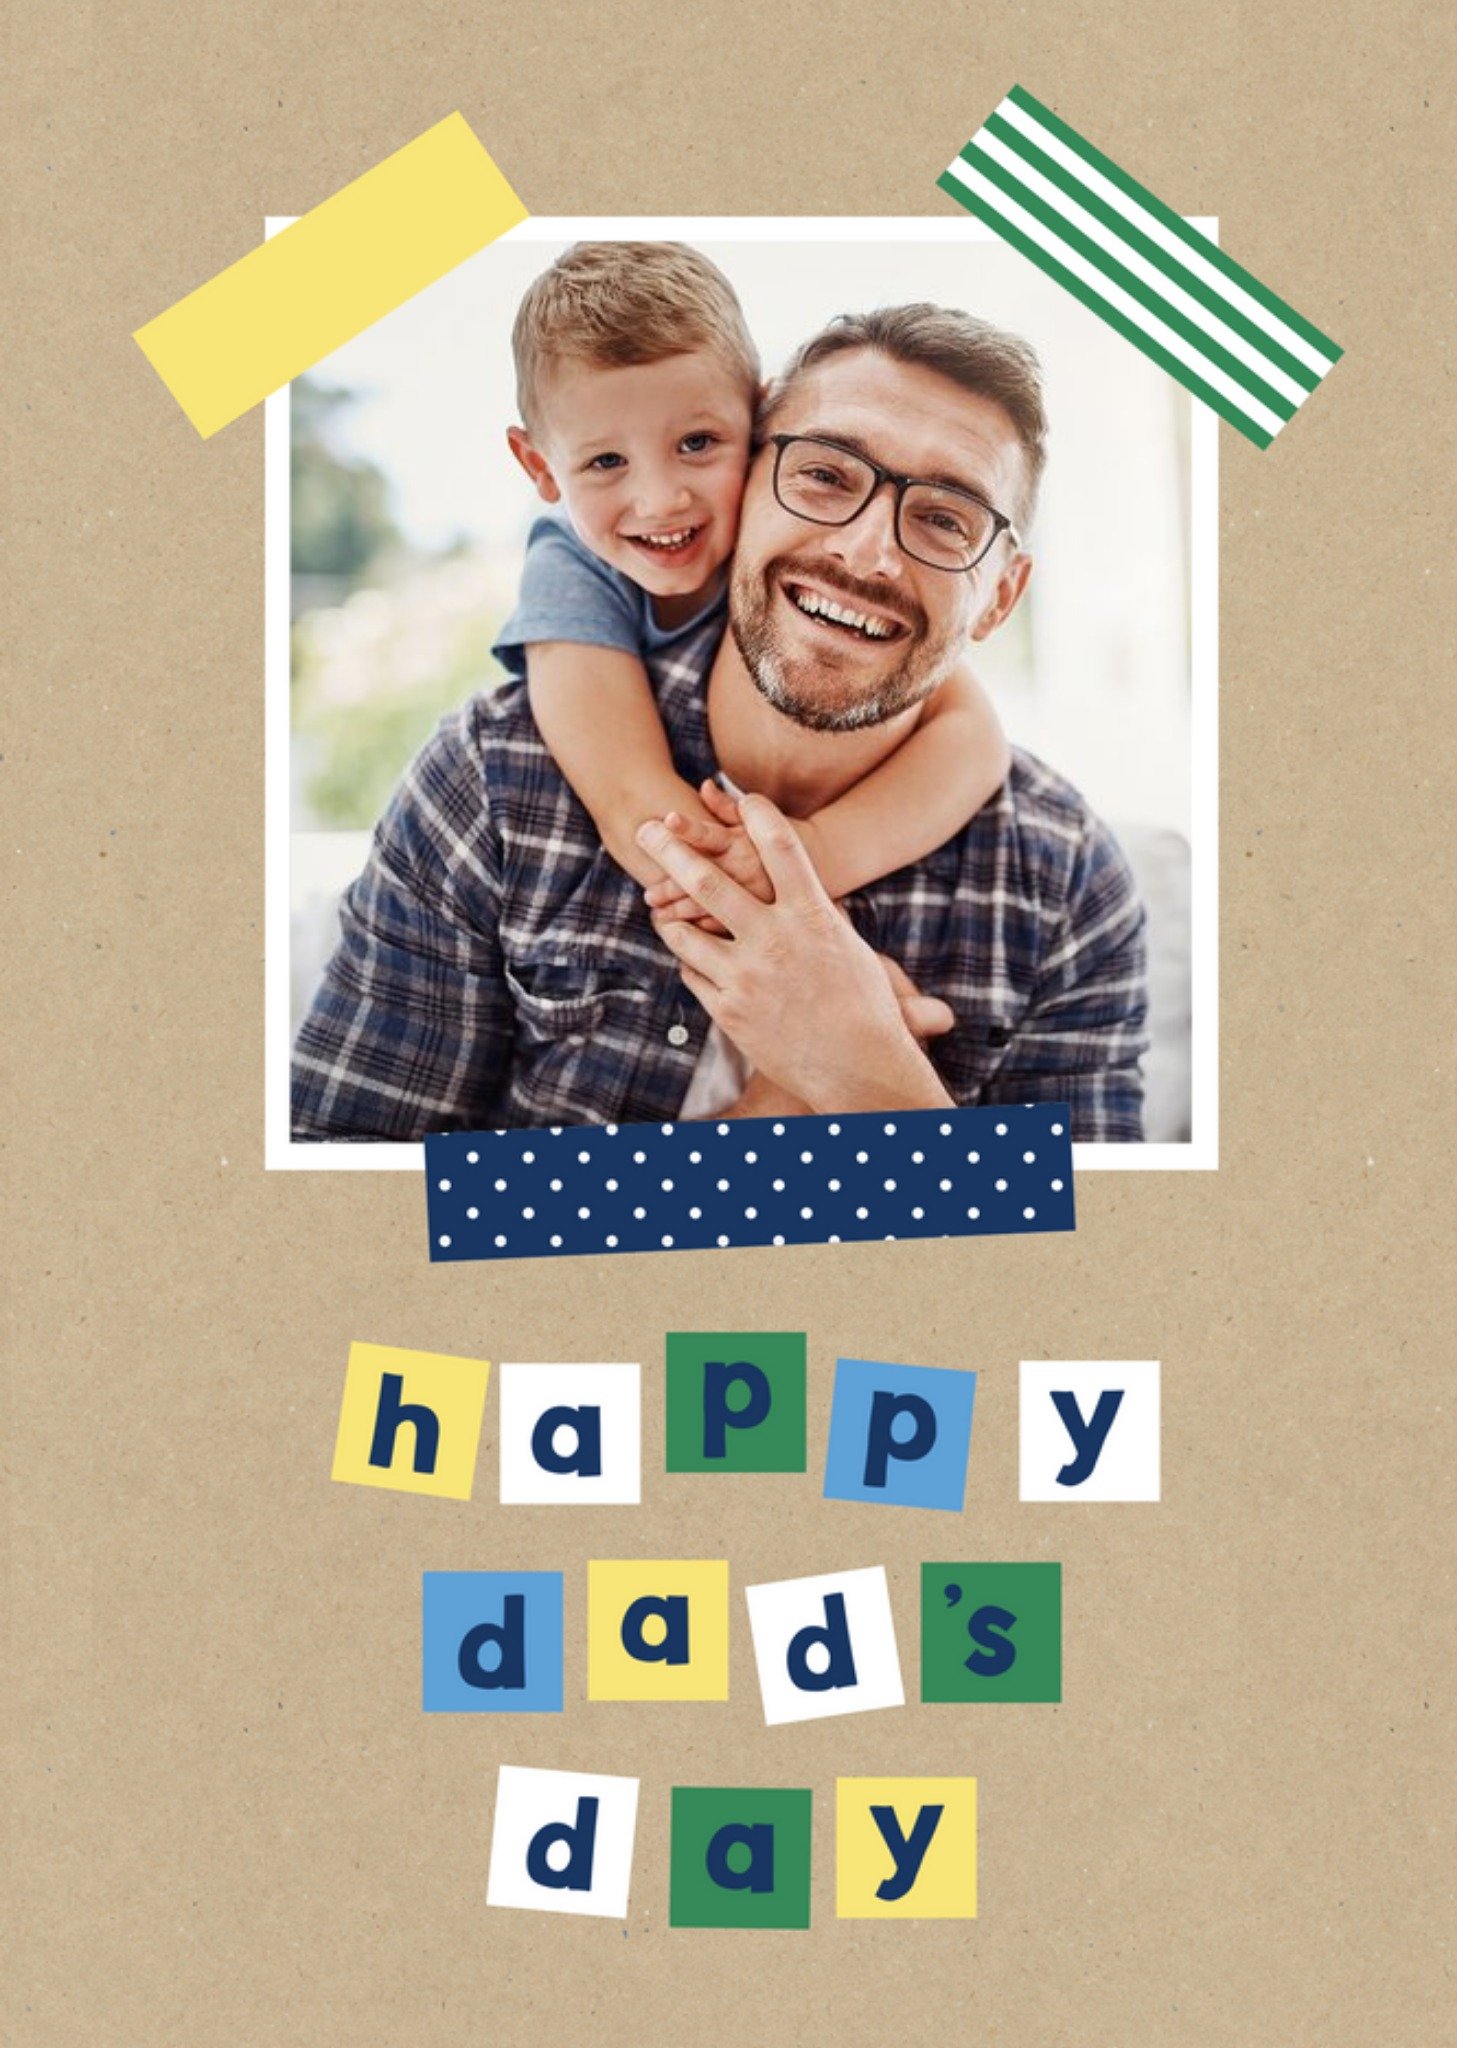 Moonpig Happy Dads Day Patterned Tape Photo Upload Card, Large